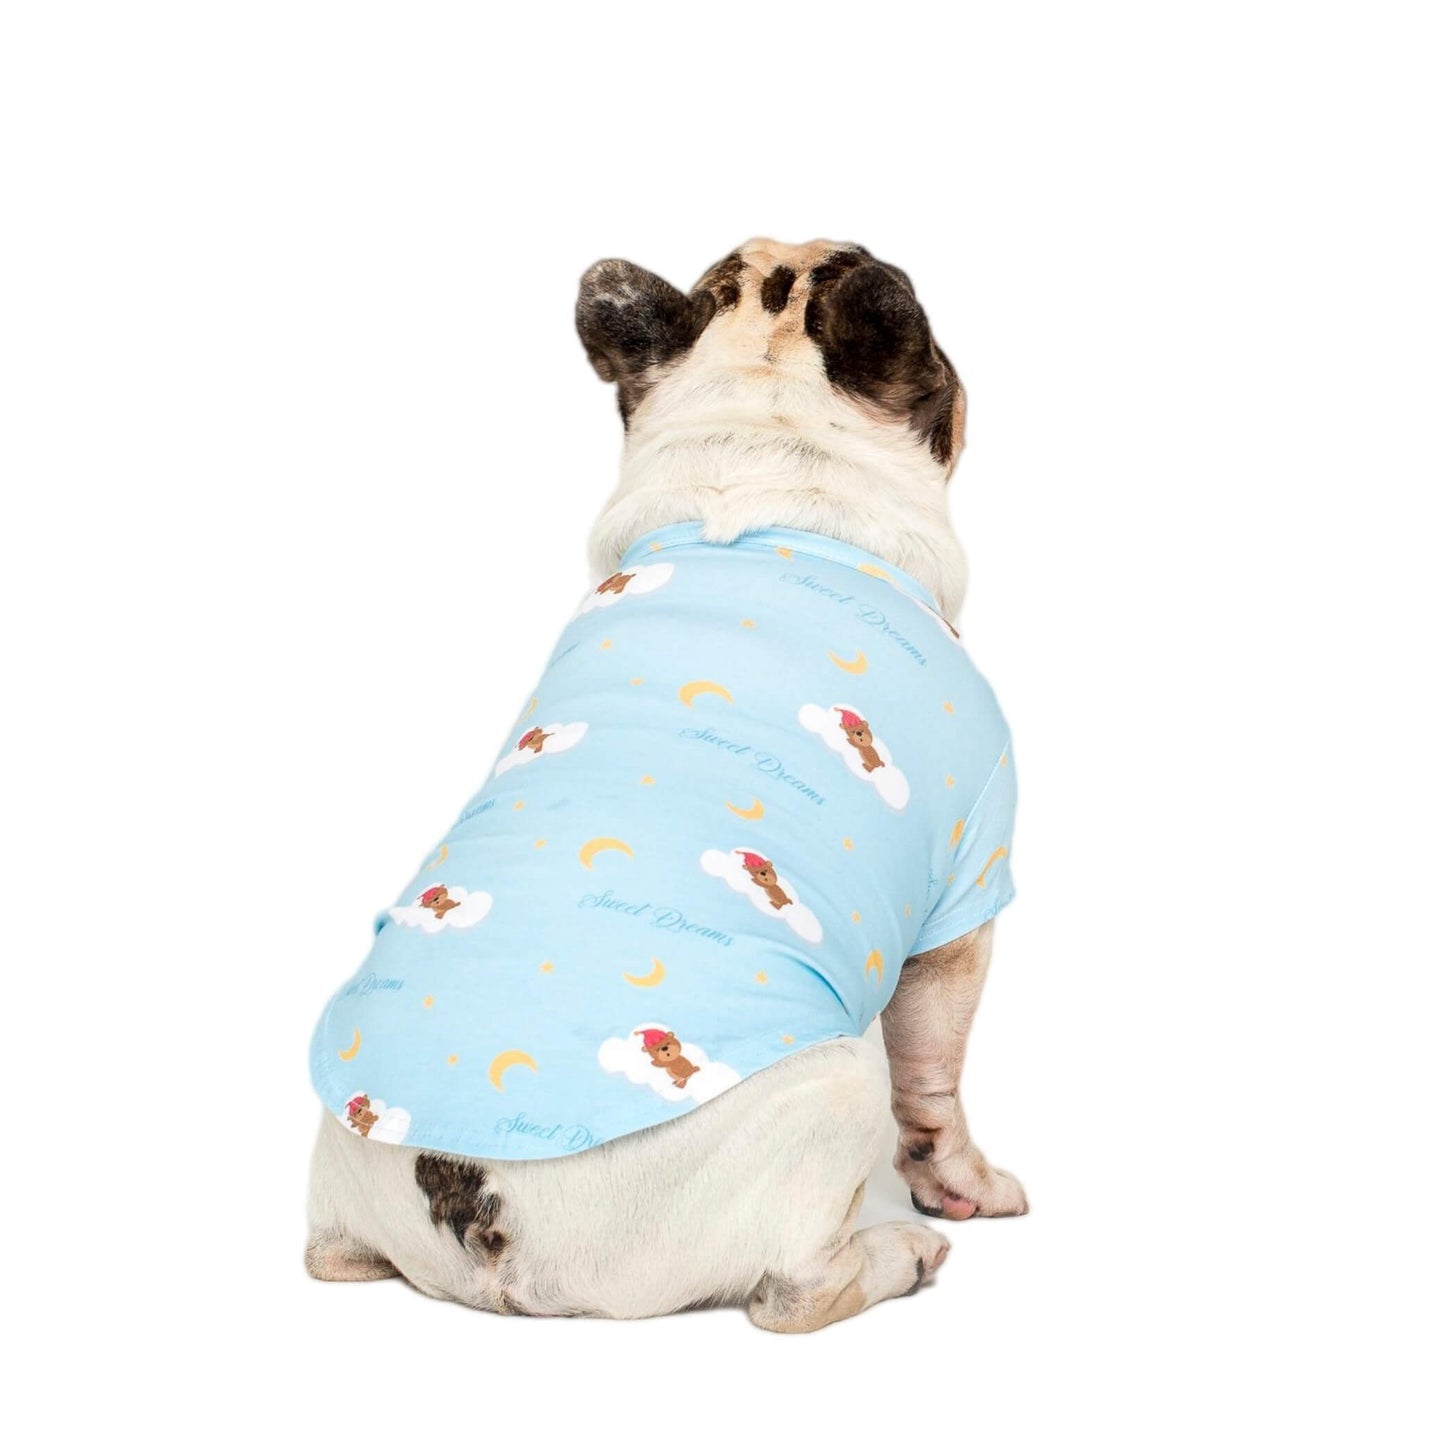 A close up of a French Bulldogs back wearing Lil Dreamer Blue pyjamas for dogs.